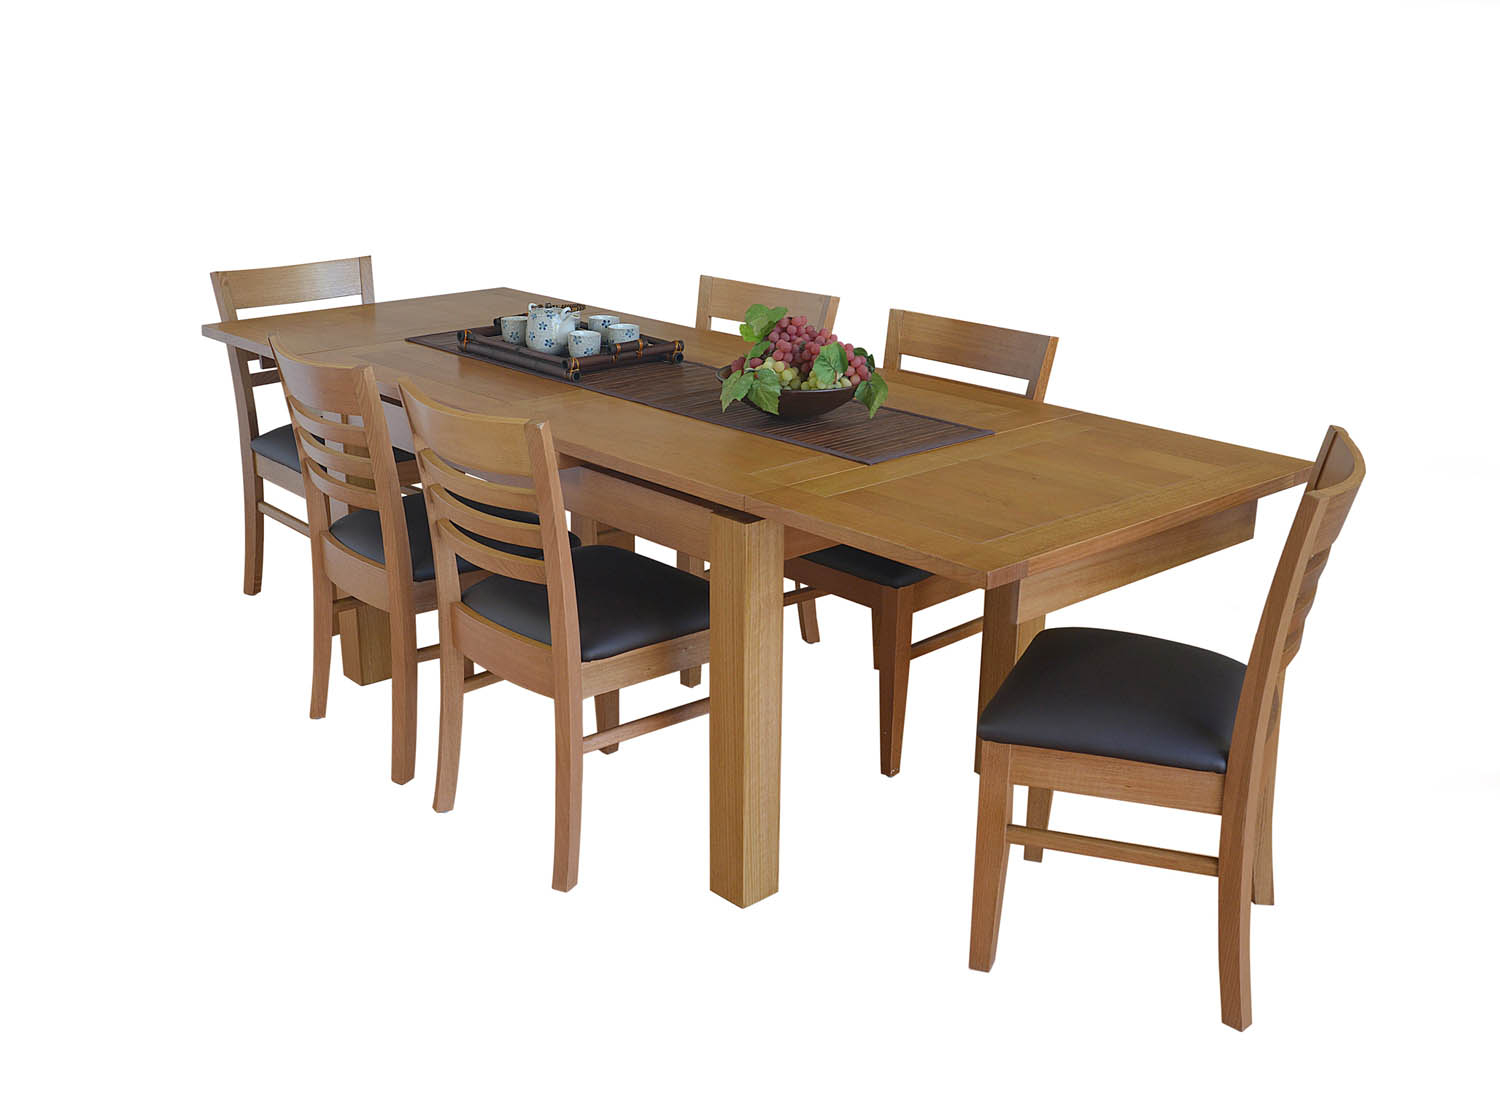 Timber Dining Sets In Geelong Furniture Design throughout size 1500 X 1114